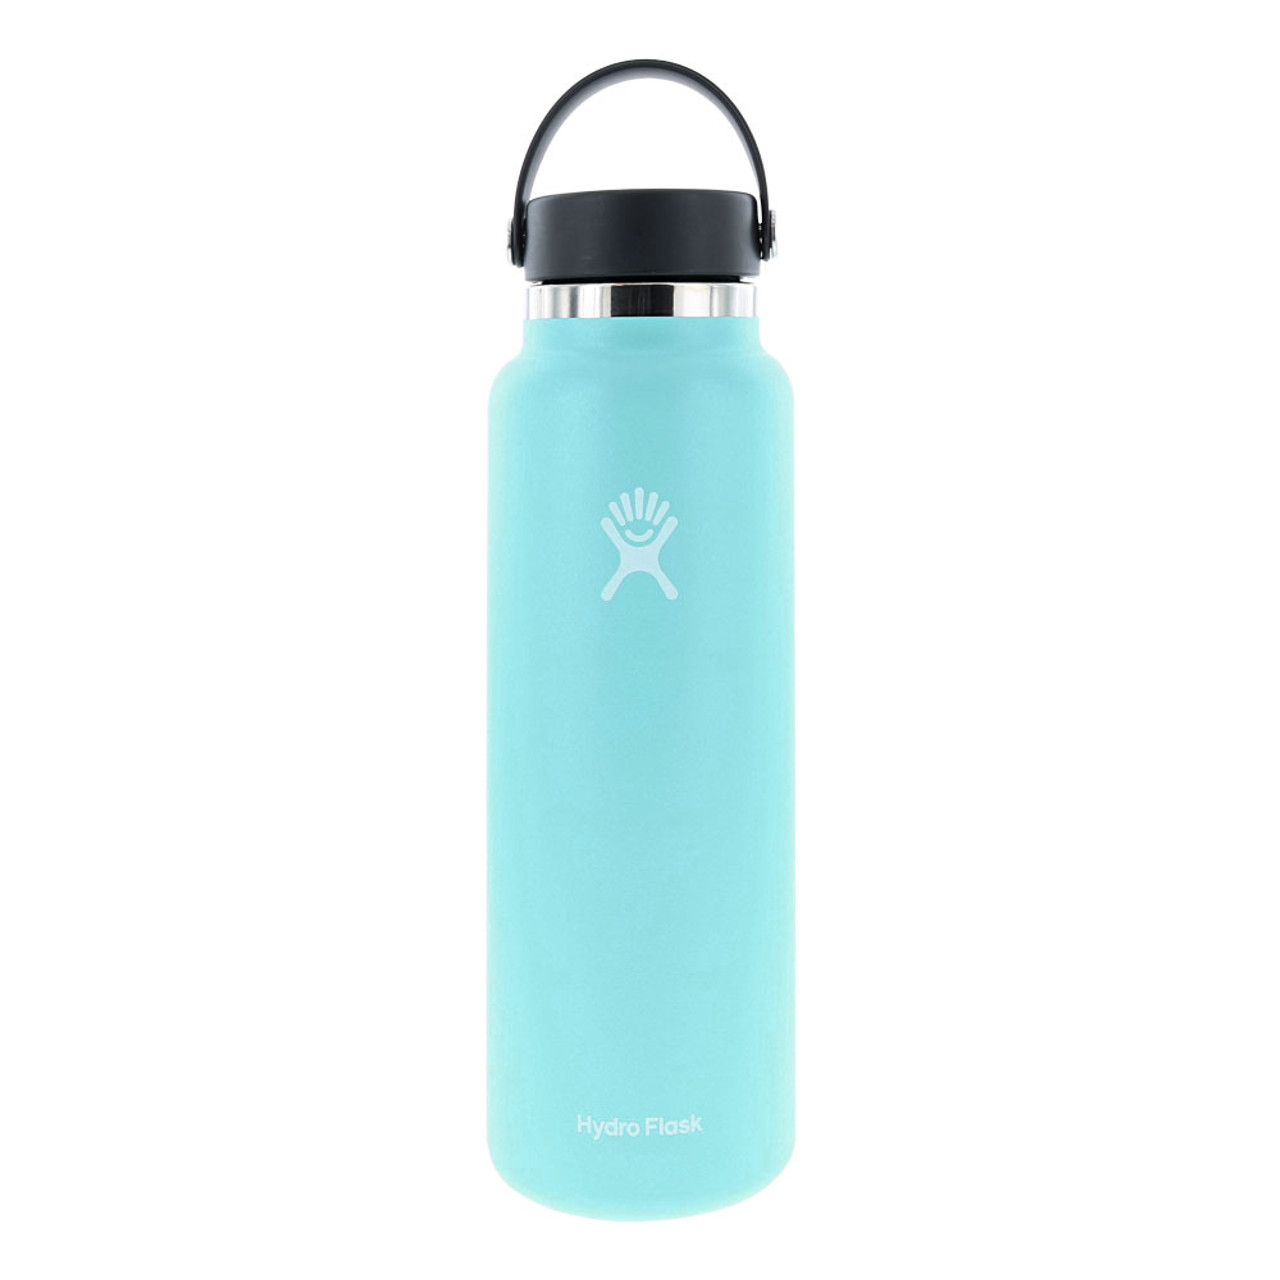 https://cdn11.bigcommerce.com/s-hkftlrohcg/images/stencil/1280x1280/products/8386/34646/40-oz.-Wide-Mouth-Hydro-Flask-2020_ALPINE_1__48240.1655400005.jpg?c=2